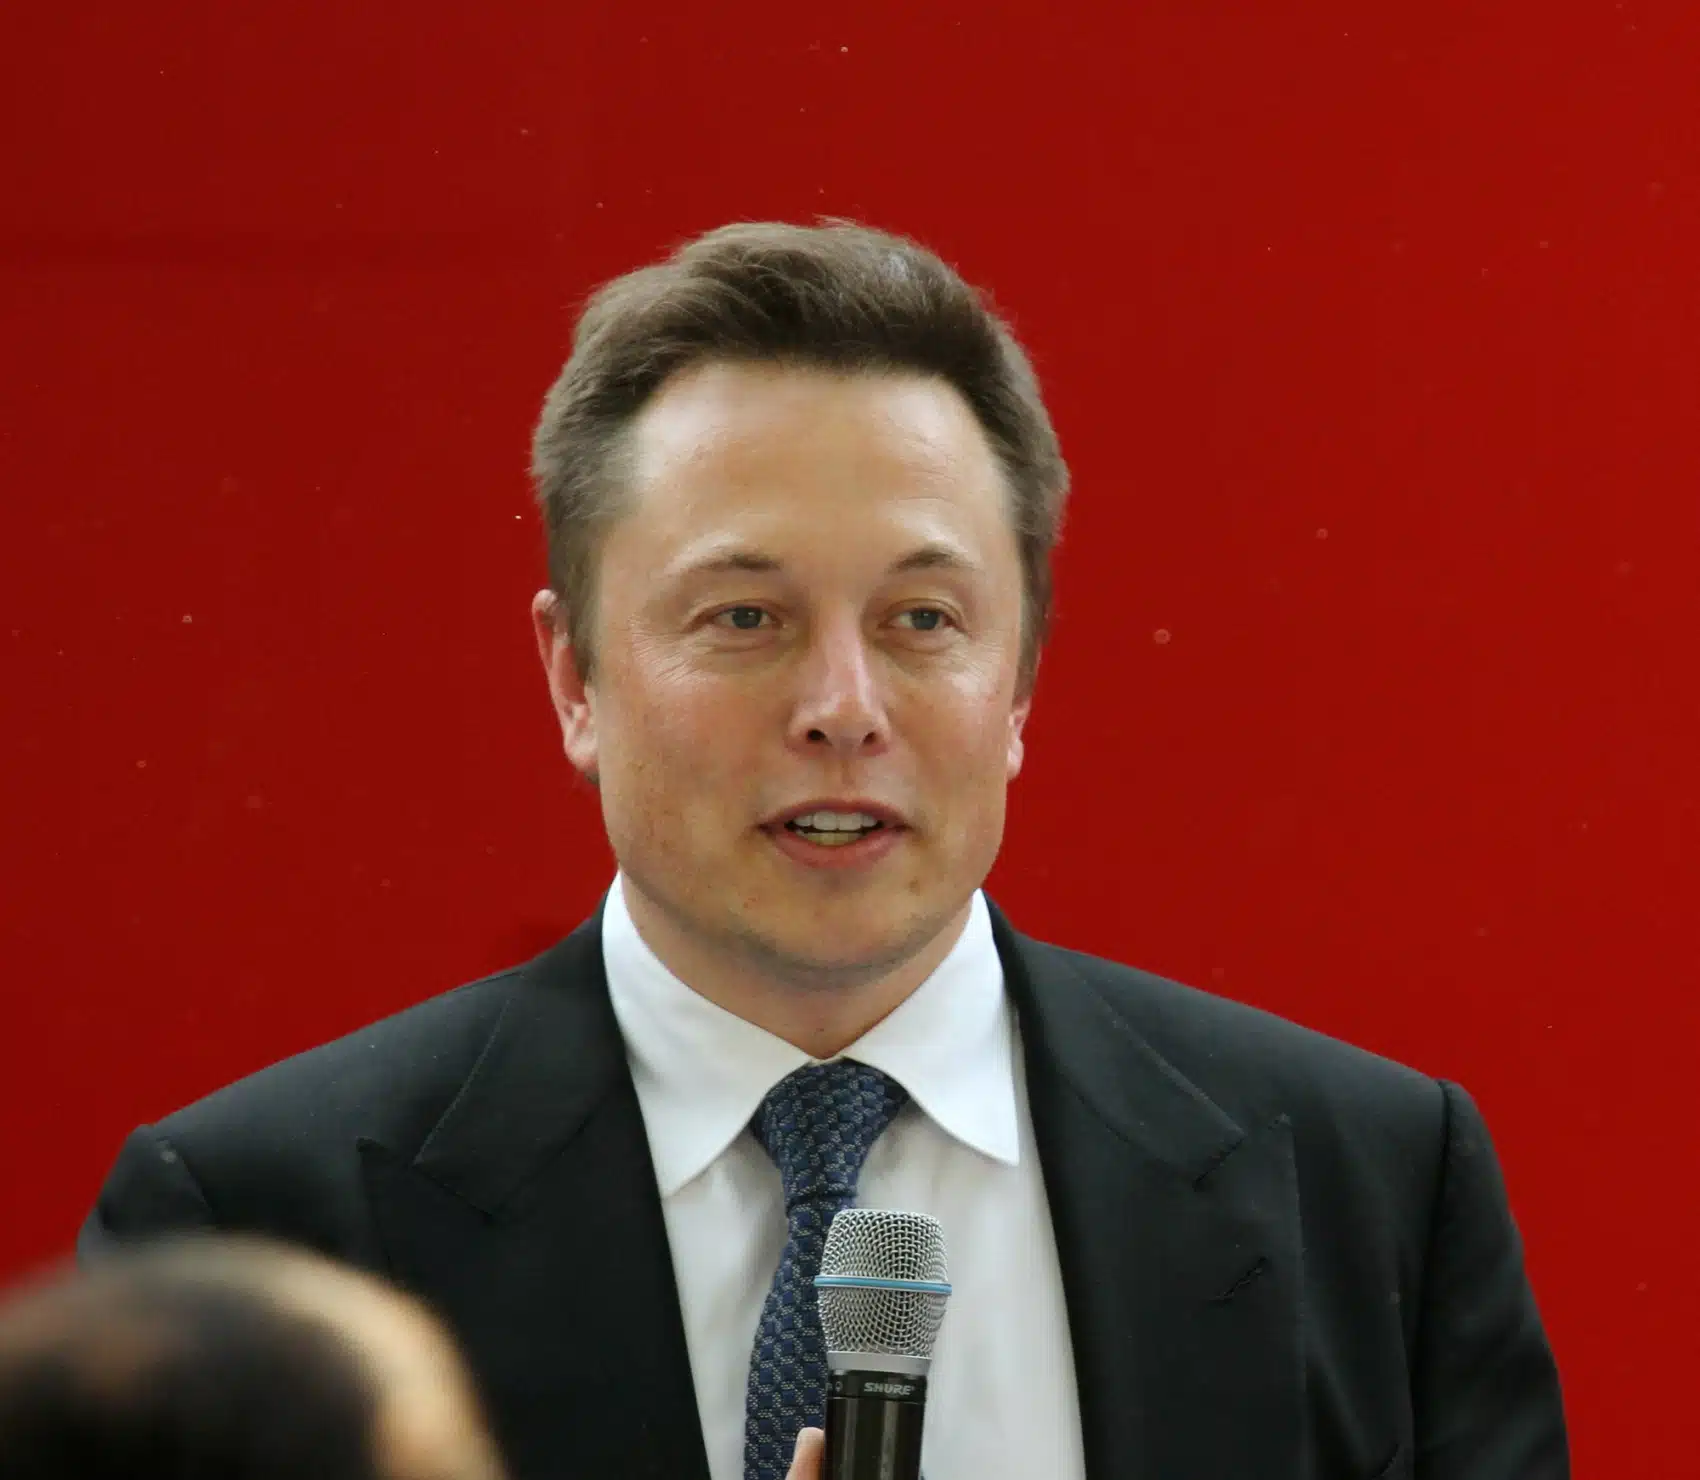 Elon Musk at a ceremony in Beijing